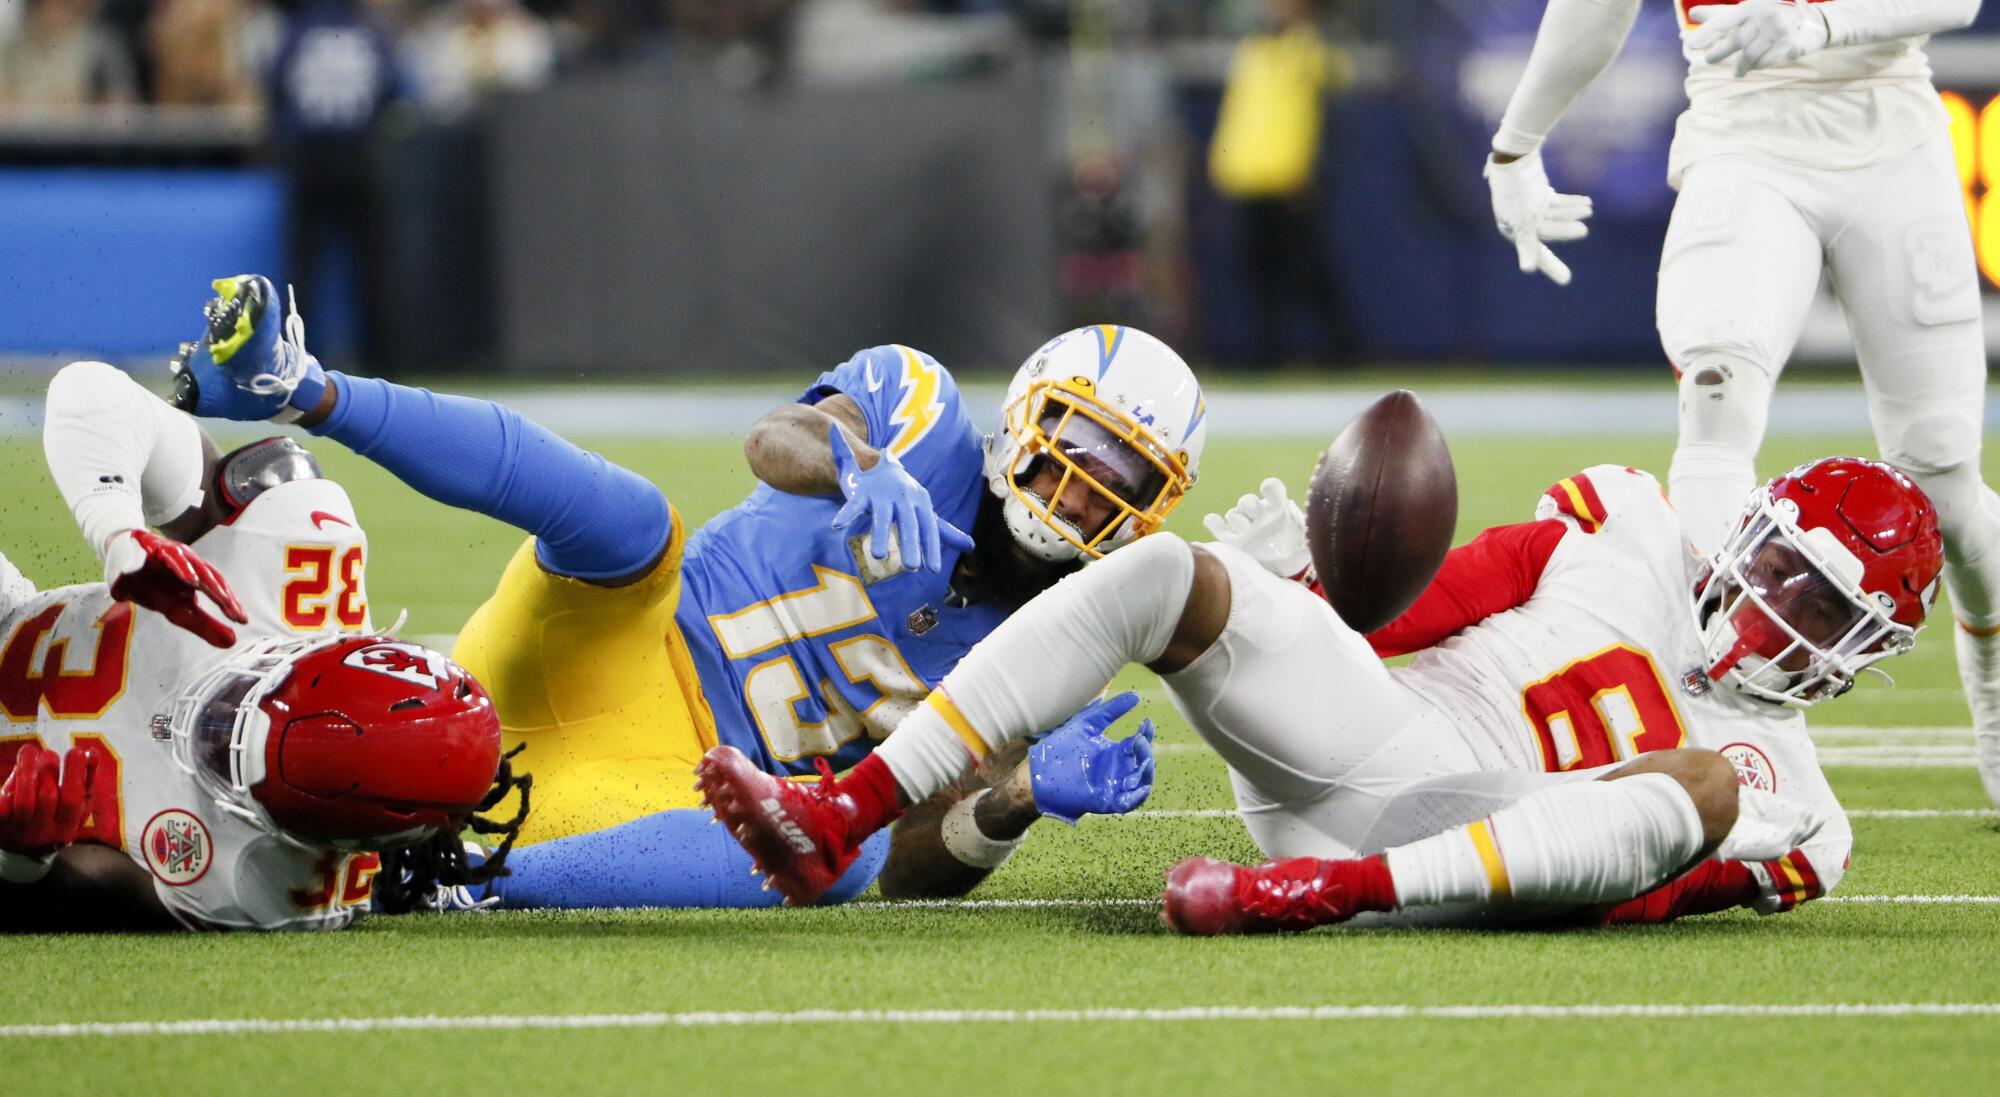 Chargers wide receiver Keenan Allen fumbles the ball against Chiefs safety Bryan Cook and linebacker Nick Bolton.